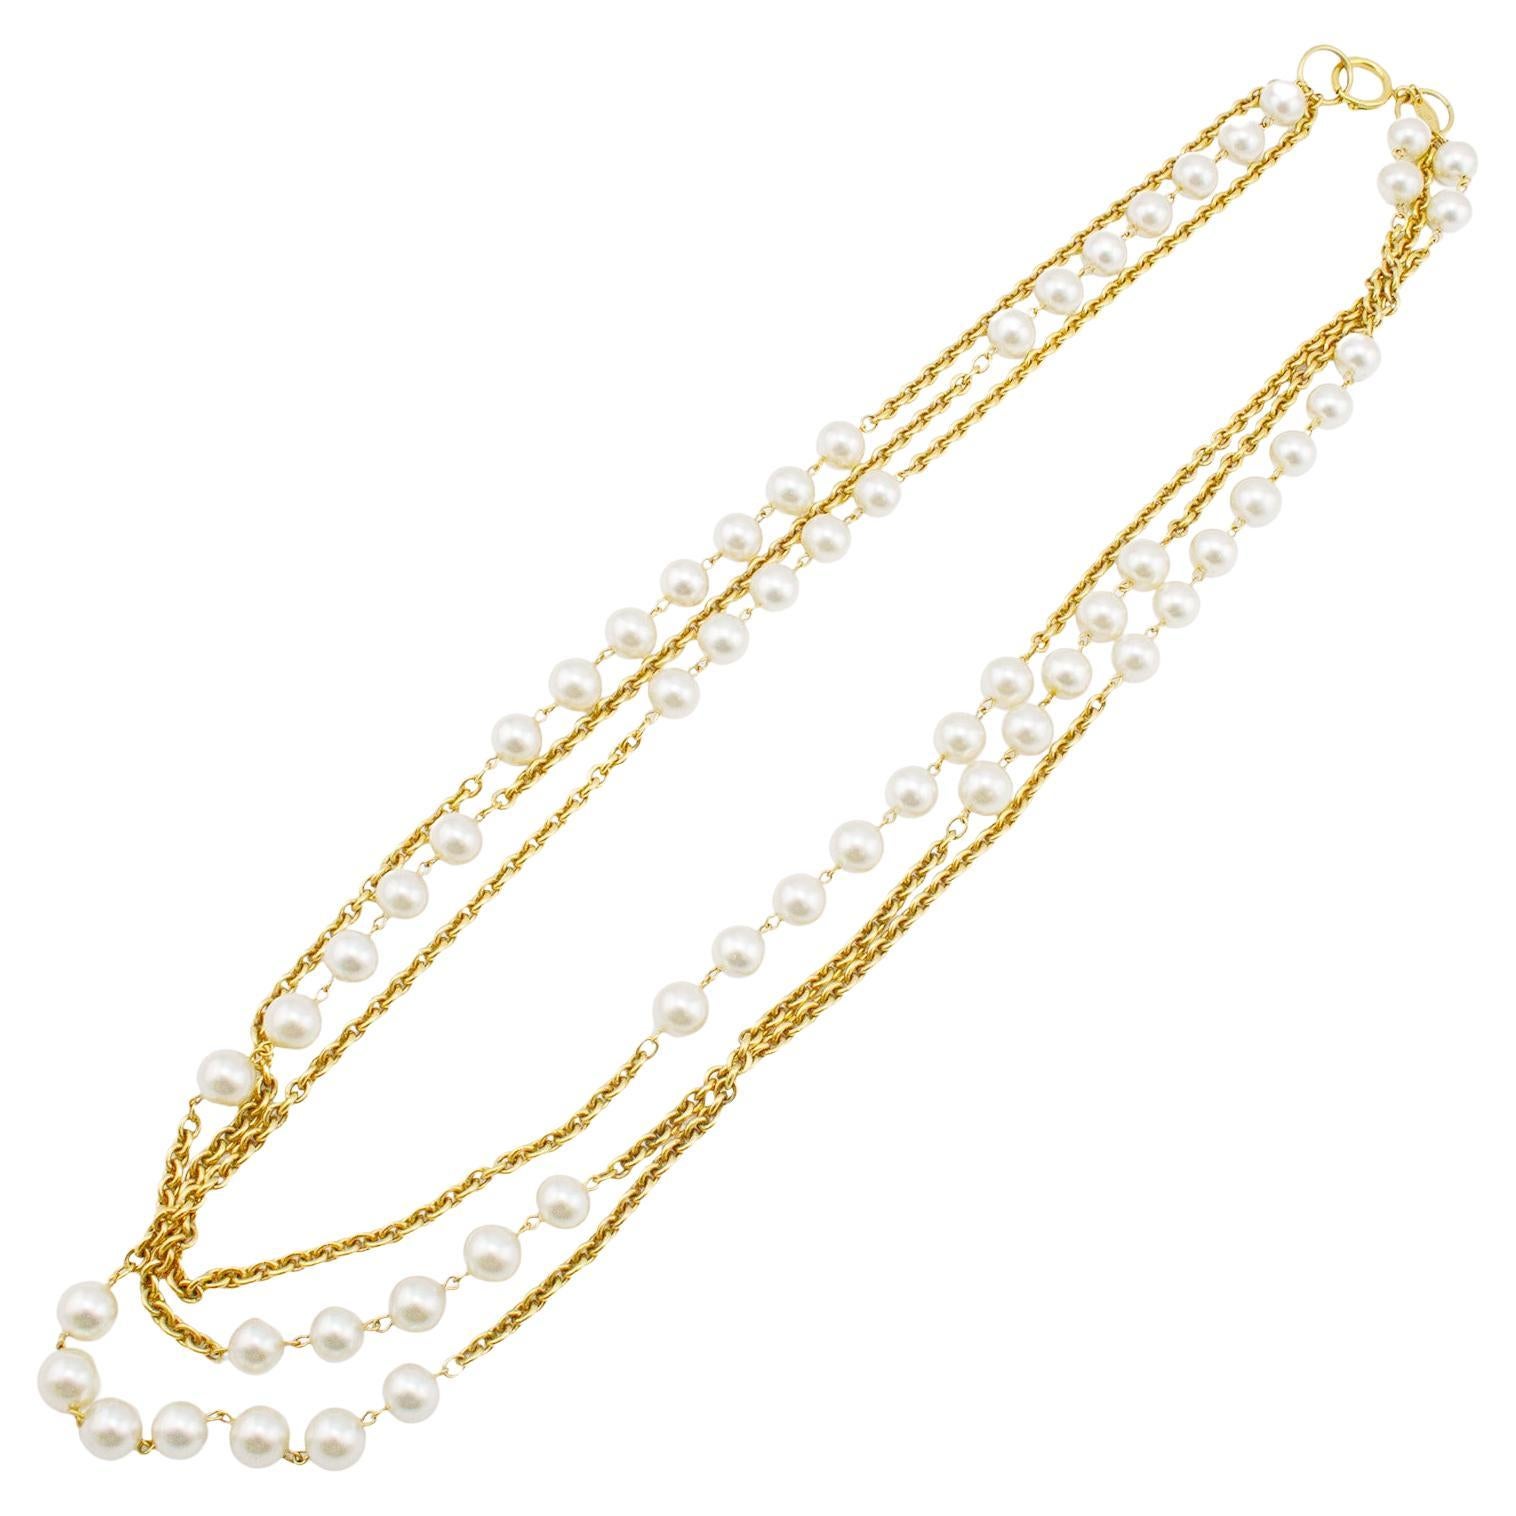 Chanel Paris 1990’s Faux Pearl Glass Crystal Camellia Necklace